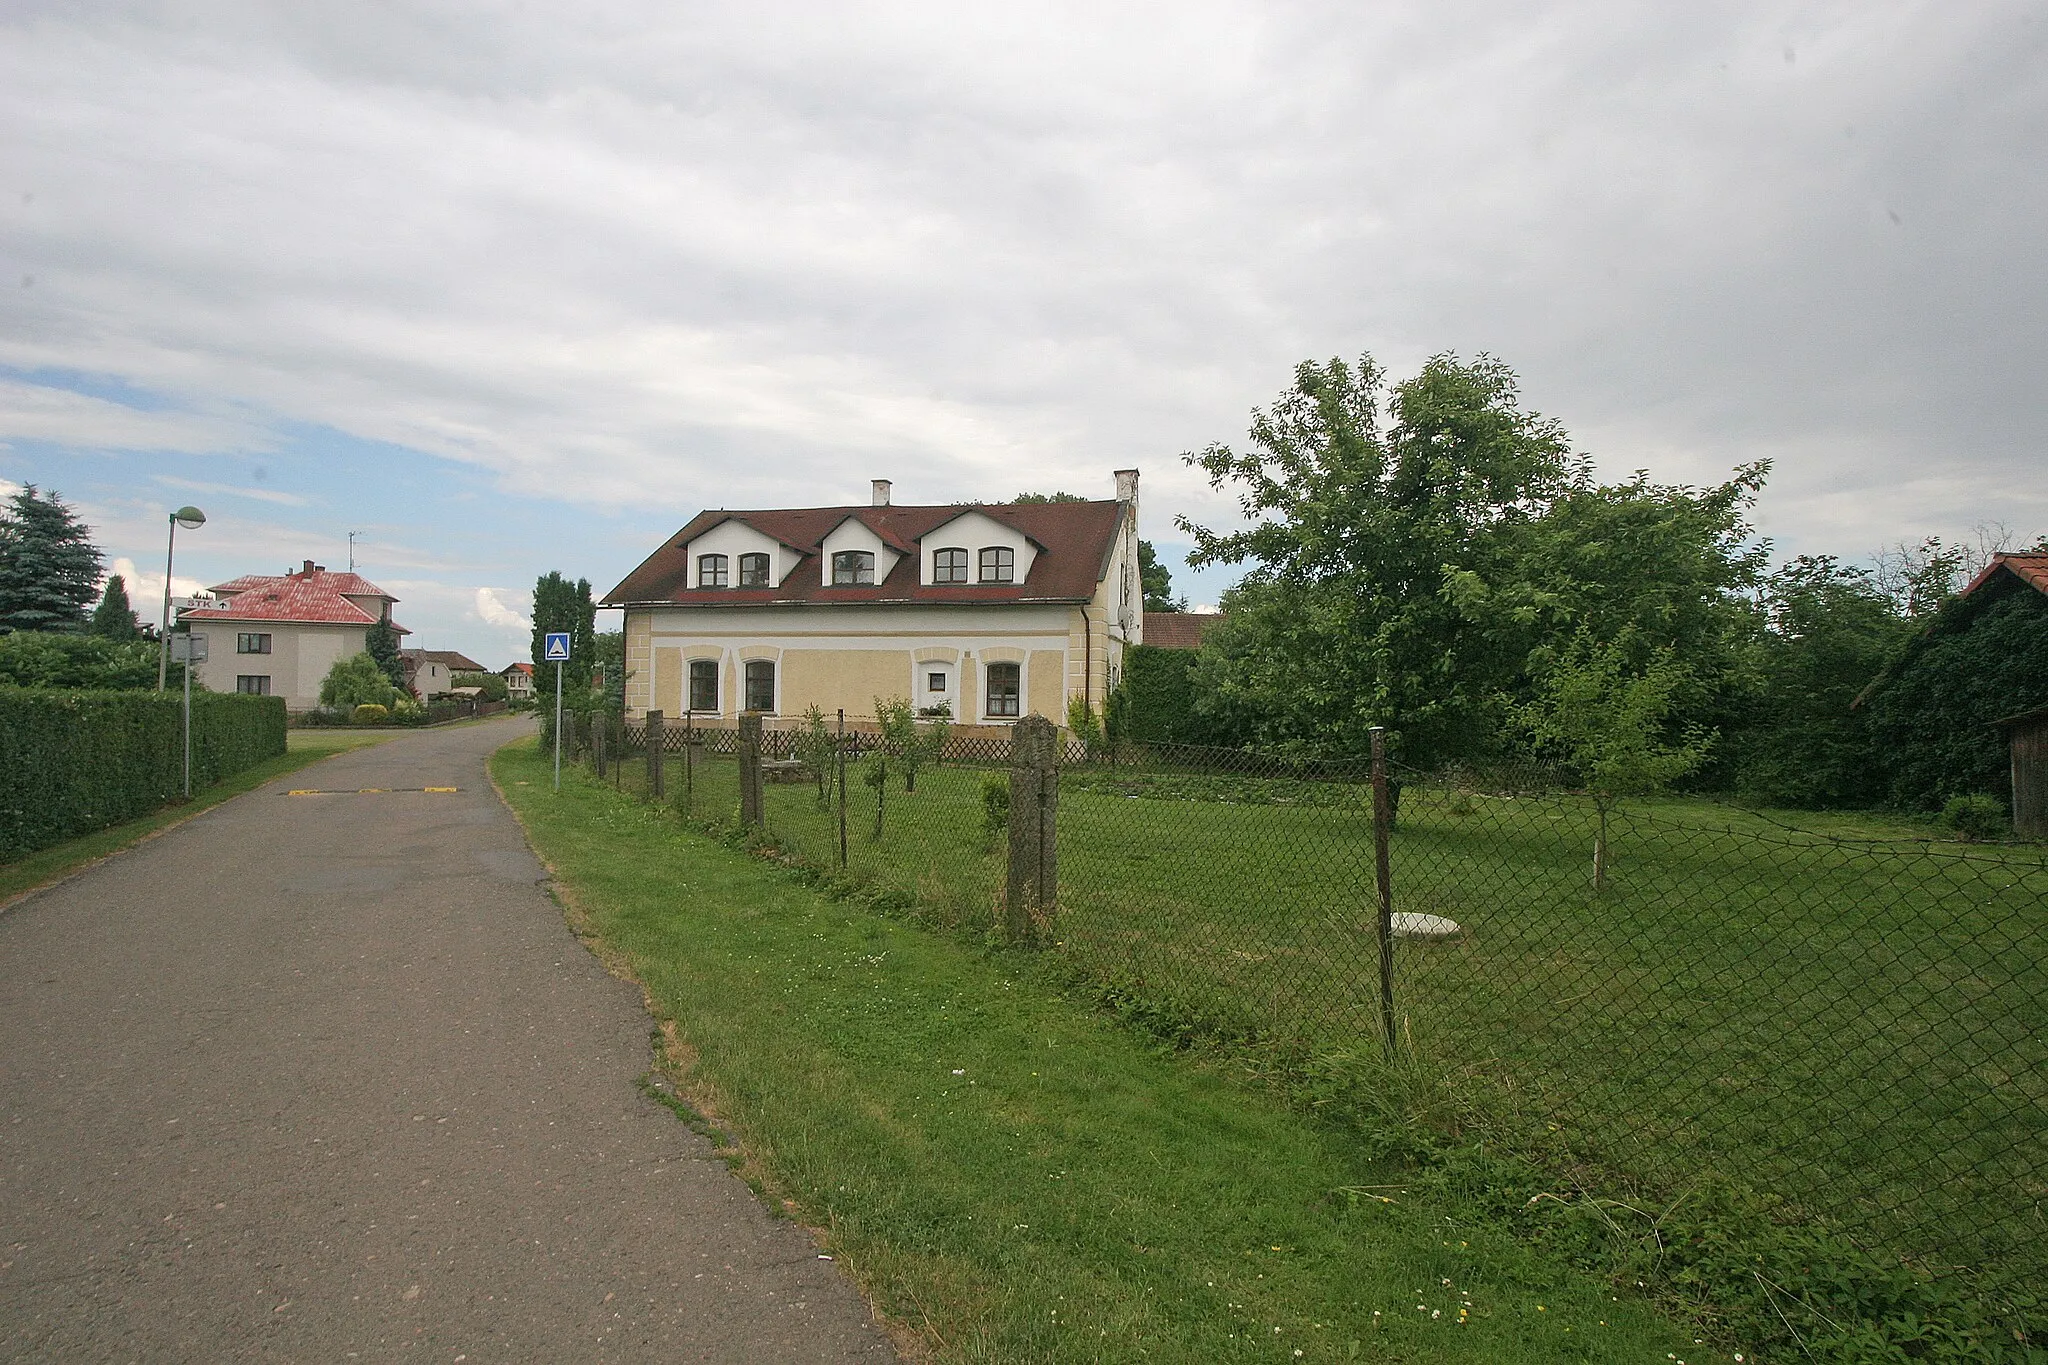 Photo showing: Sovětice čp. 24
Camera location 50° 18′ 24.78″ N, 15° 42′ 26.07″ E View this and other nearby images on: OpenStreetMap 50.306883;   15.707242

This file was created as a part of the photographic program of Wikimedia Czech Republic. Project: Foto českých obcí The program supports Wikimedia Commons photographers in the Czech Republic.